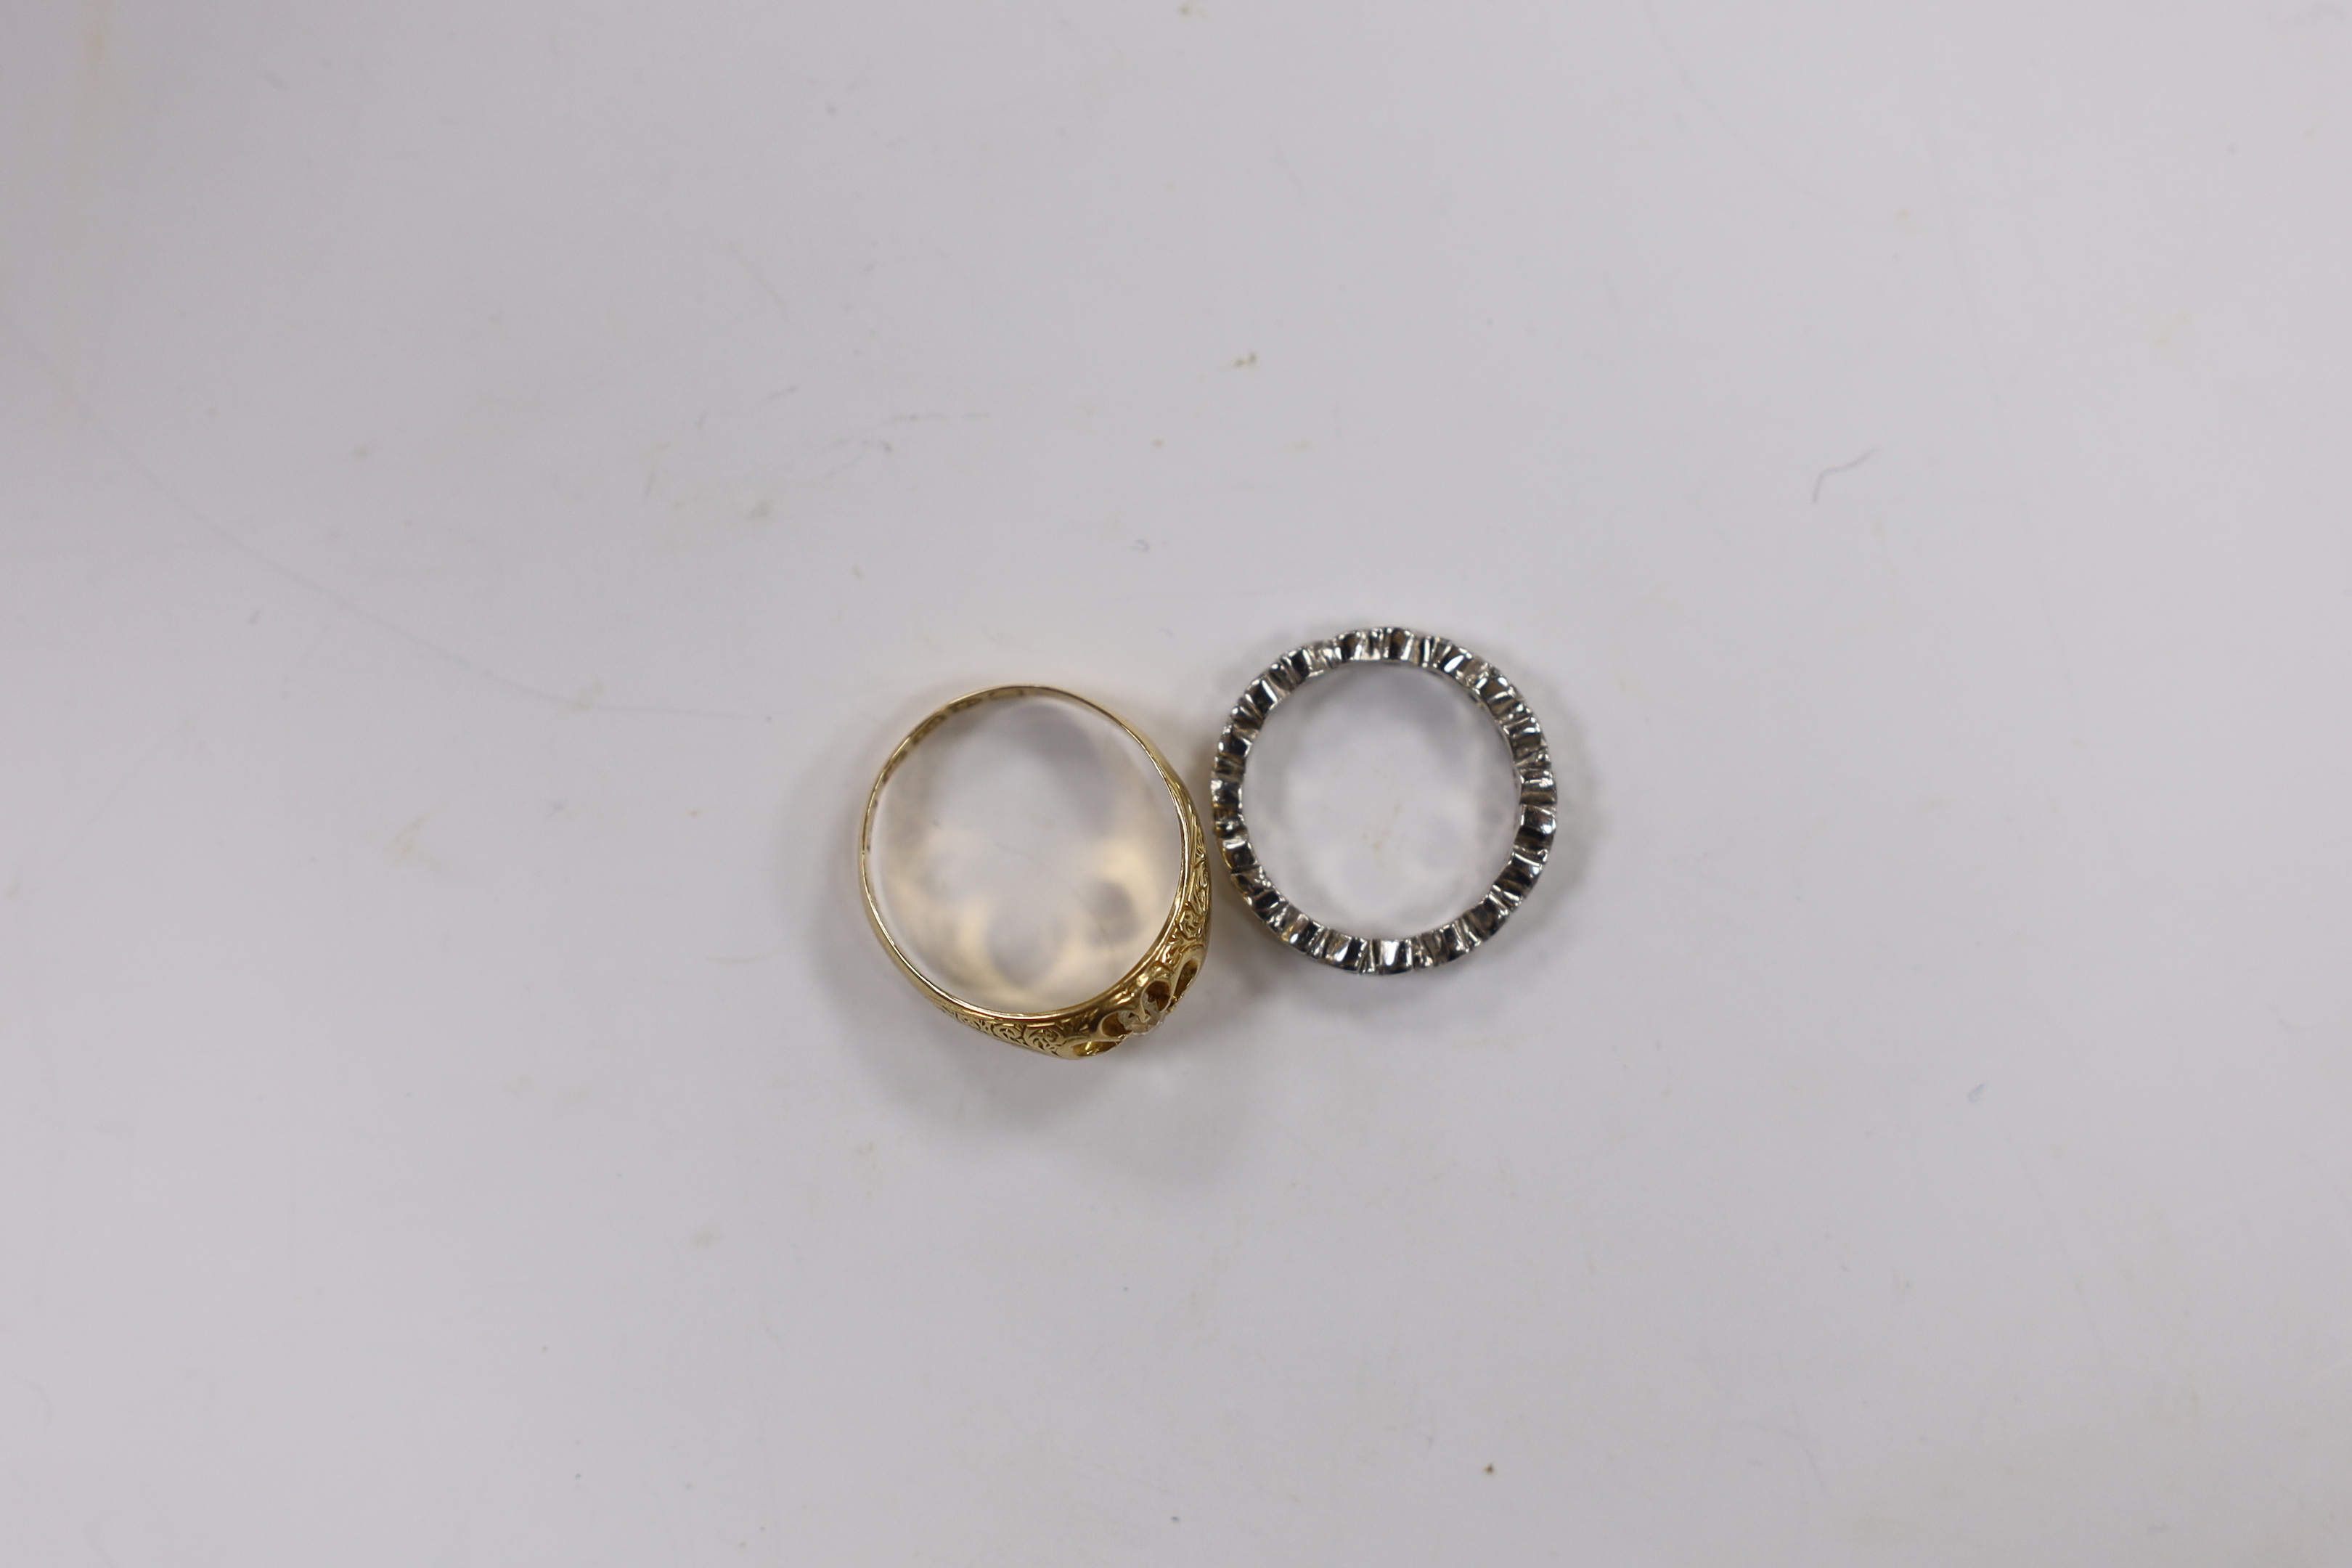 An early 20th century 18ct gold and claw set solitaire diamond ring, size M, gross 3.8 grams and a modern platinum and diamond chip set full eternity ring, size G, gross 3.1 grams.